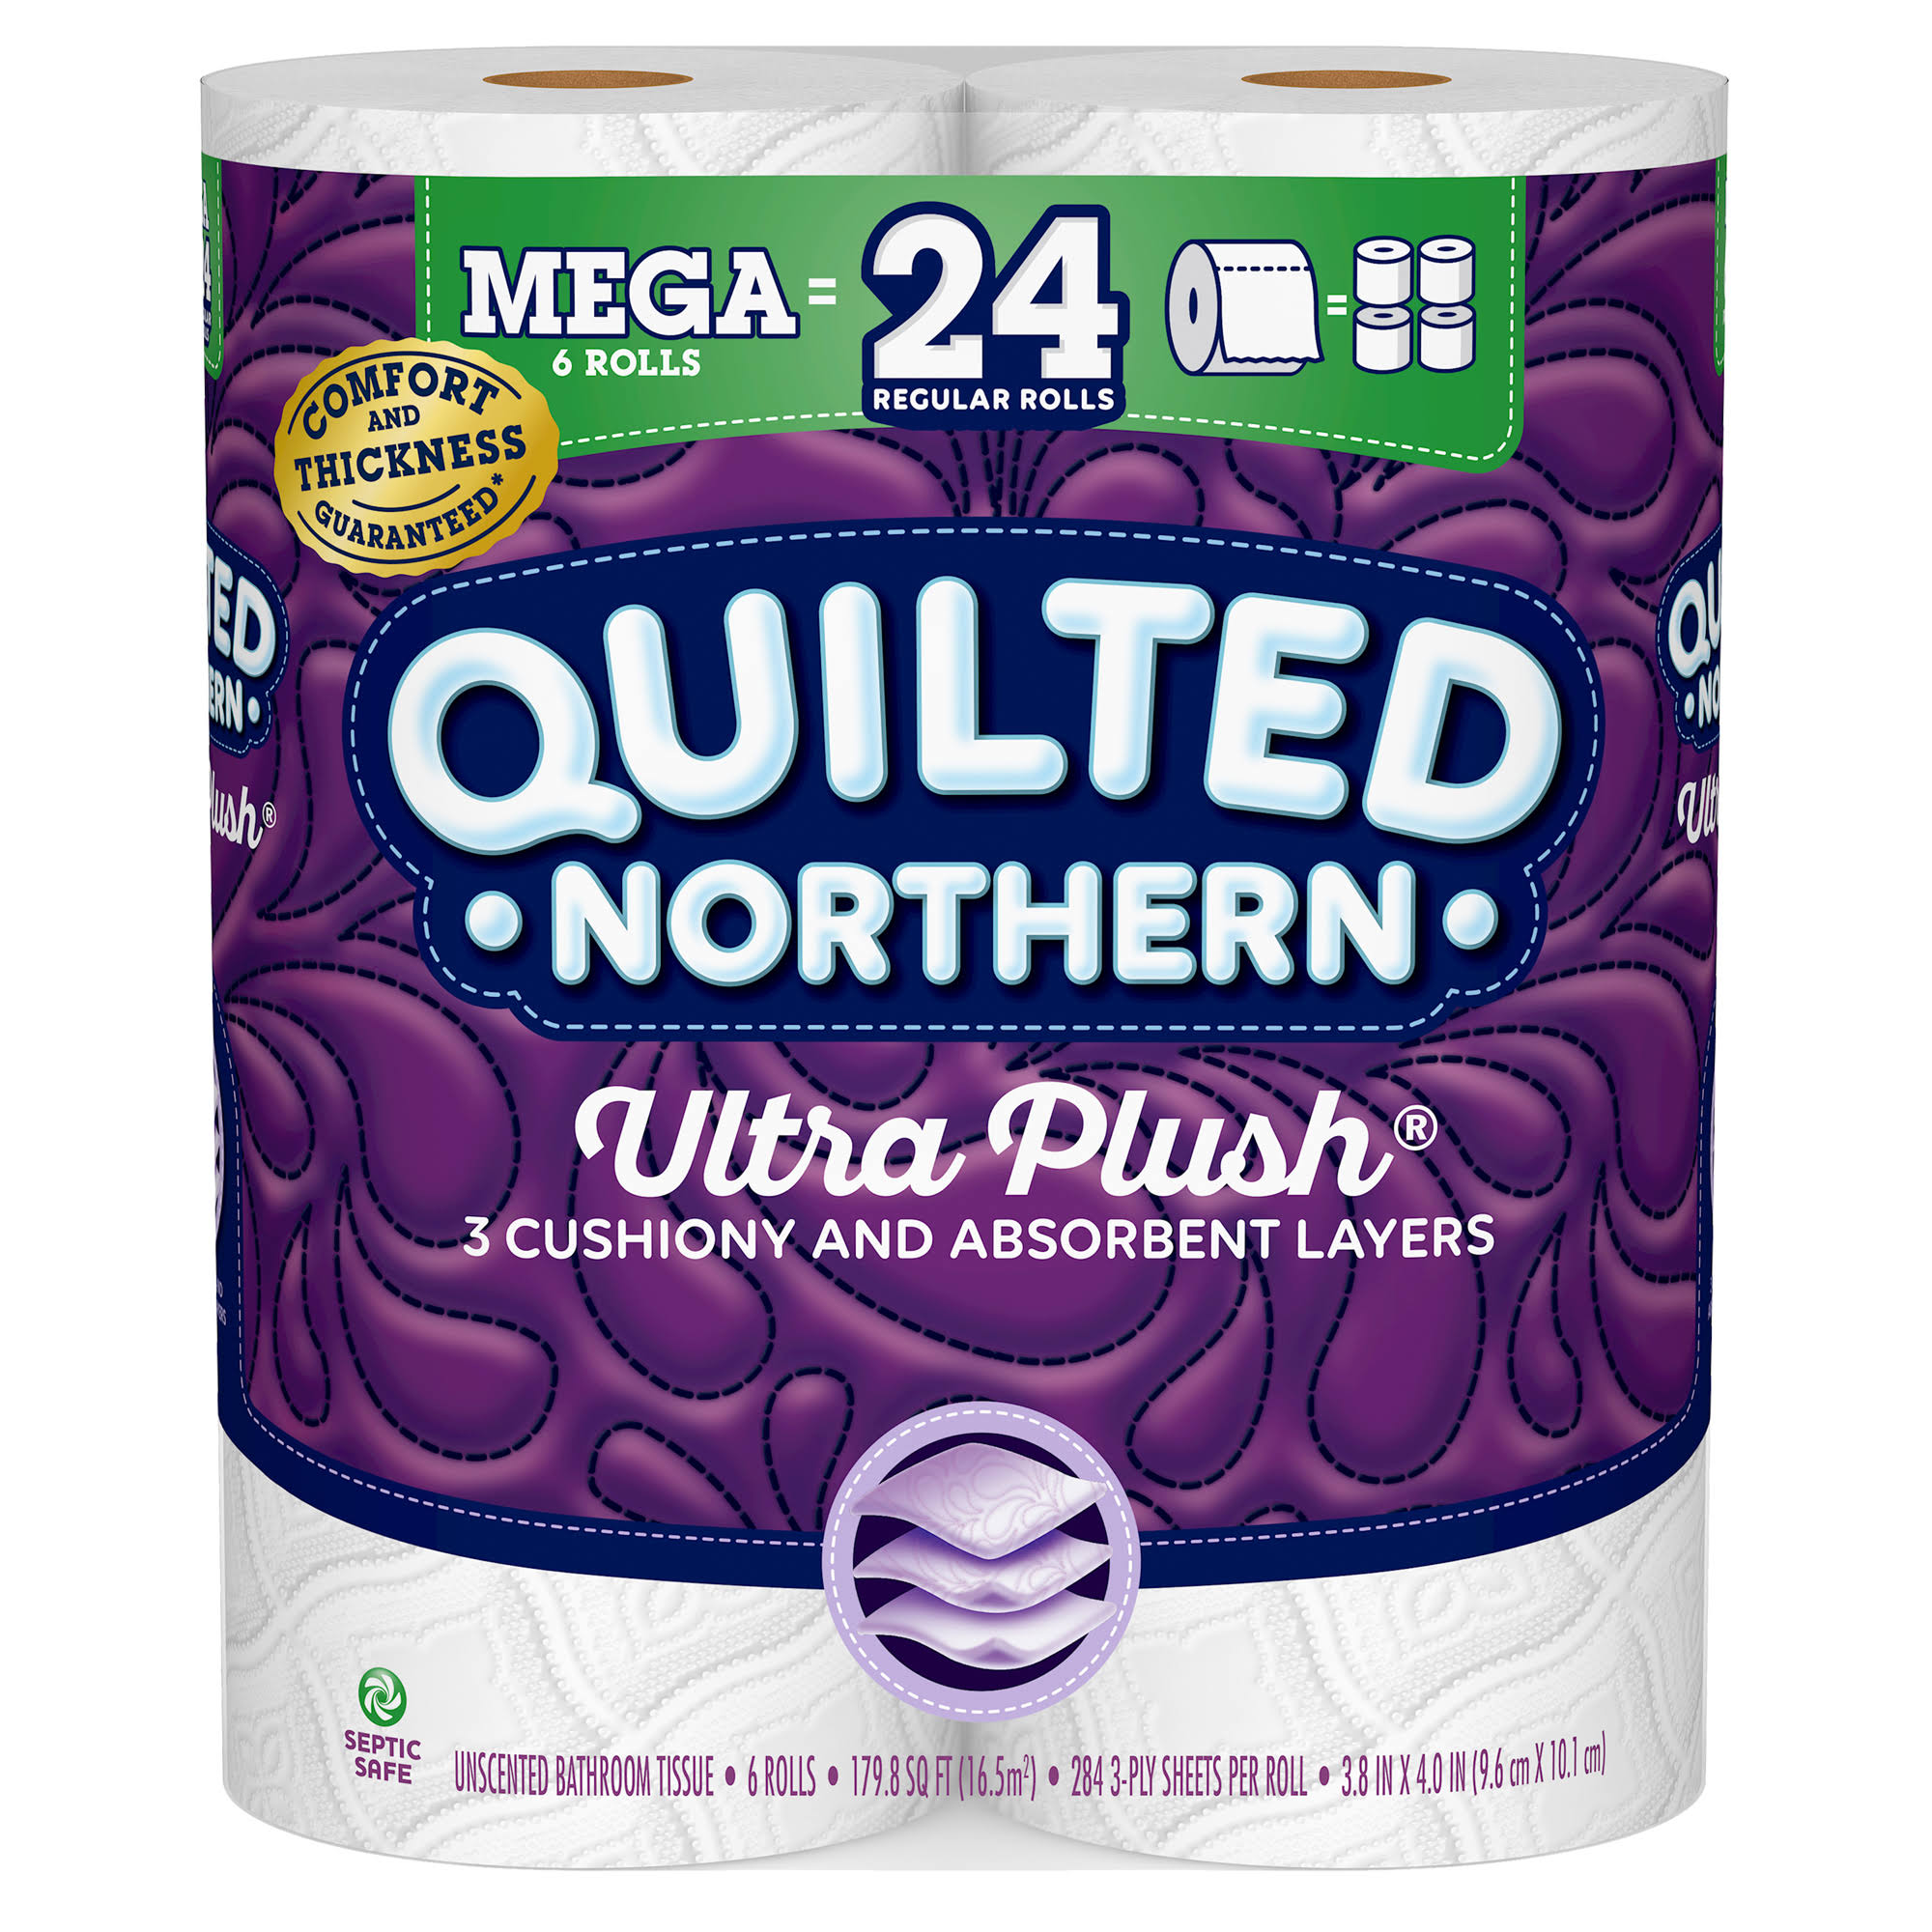 Quilted Northern Ultra Plush Bathroom Tissue, Unscented, Mega Rolls, 3-Ply - 6 rolls